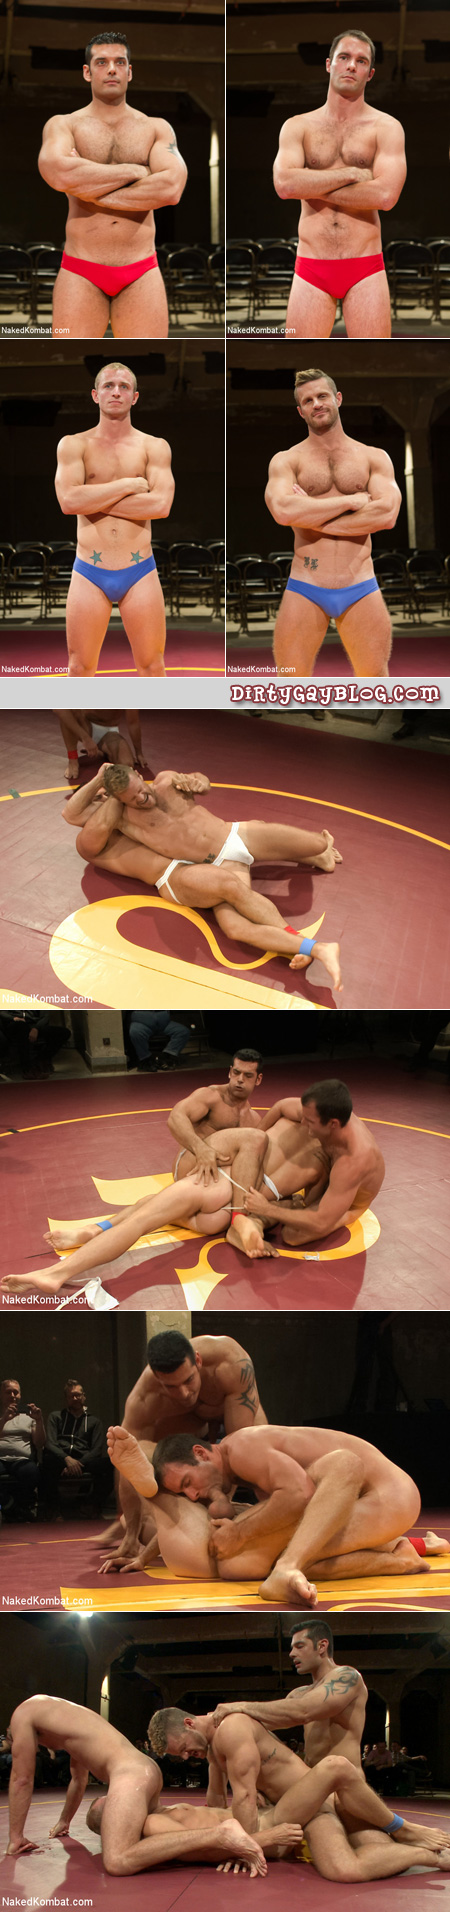 Tag-team wrestling in jockstraps leads to a four-way gay fuck on the wrestling mat in front of a live audience